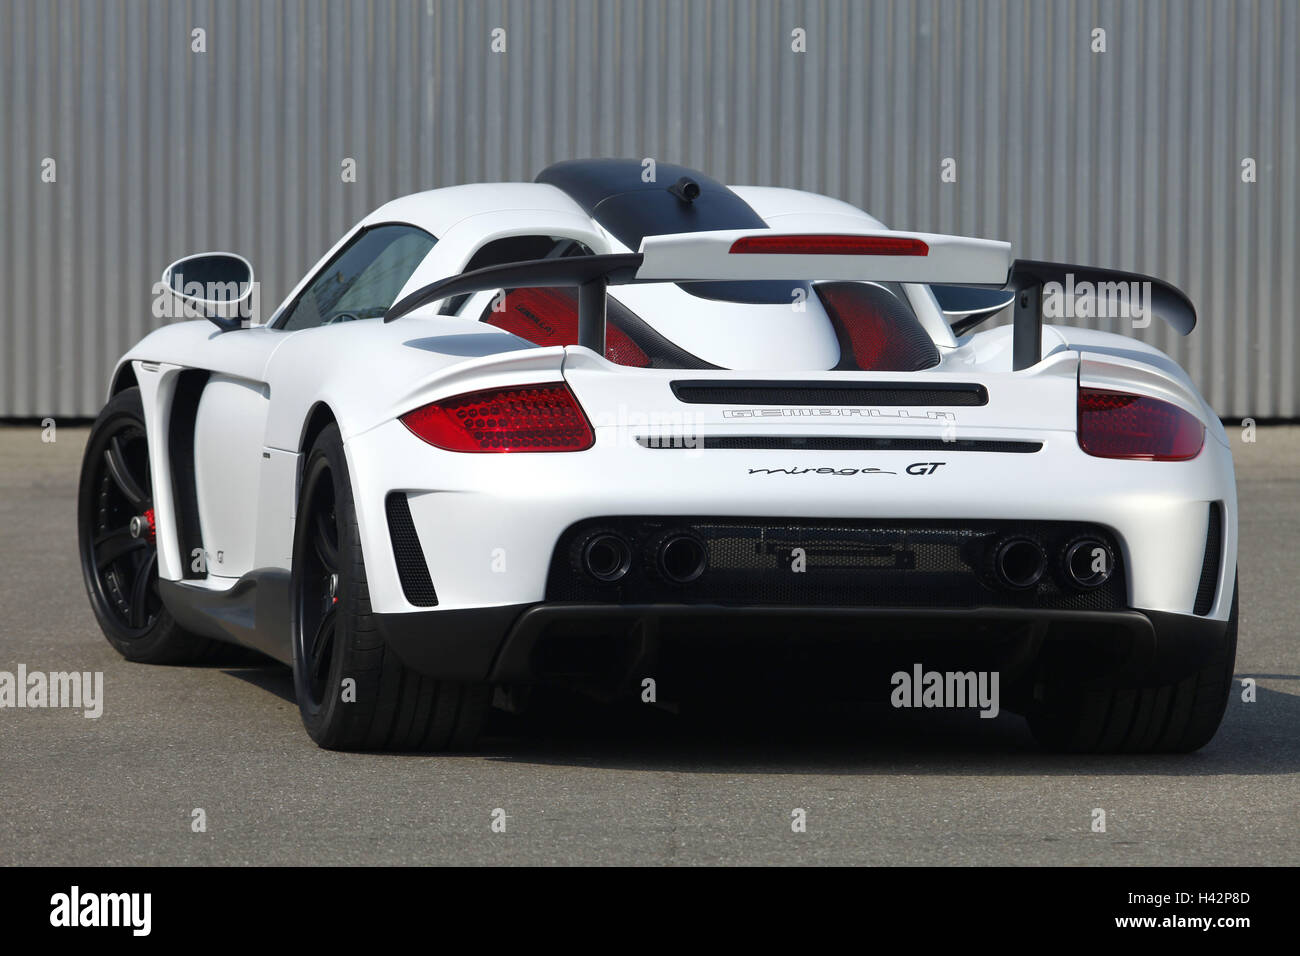 Porsche, Gemballa Mirage GT white, aslant from the back, no property release, Stock Photo